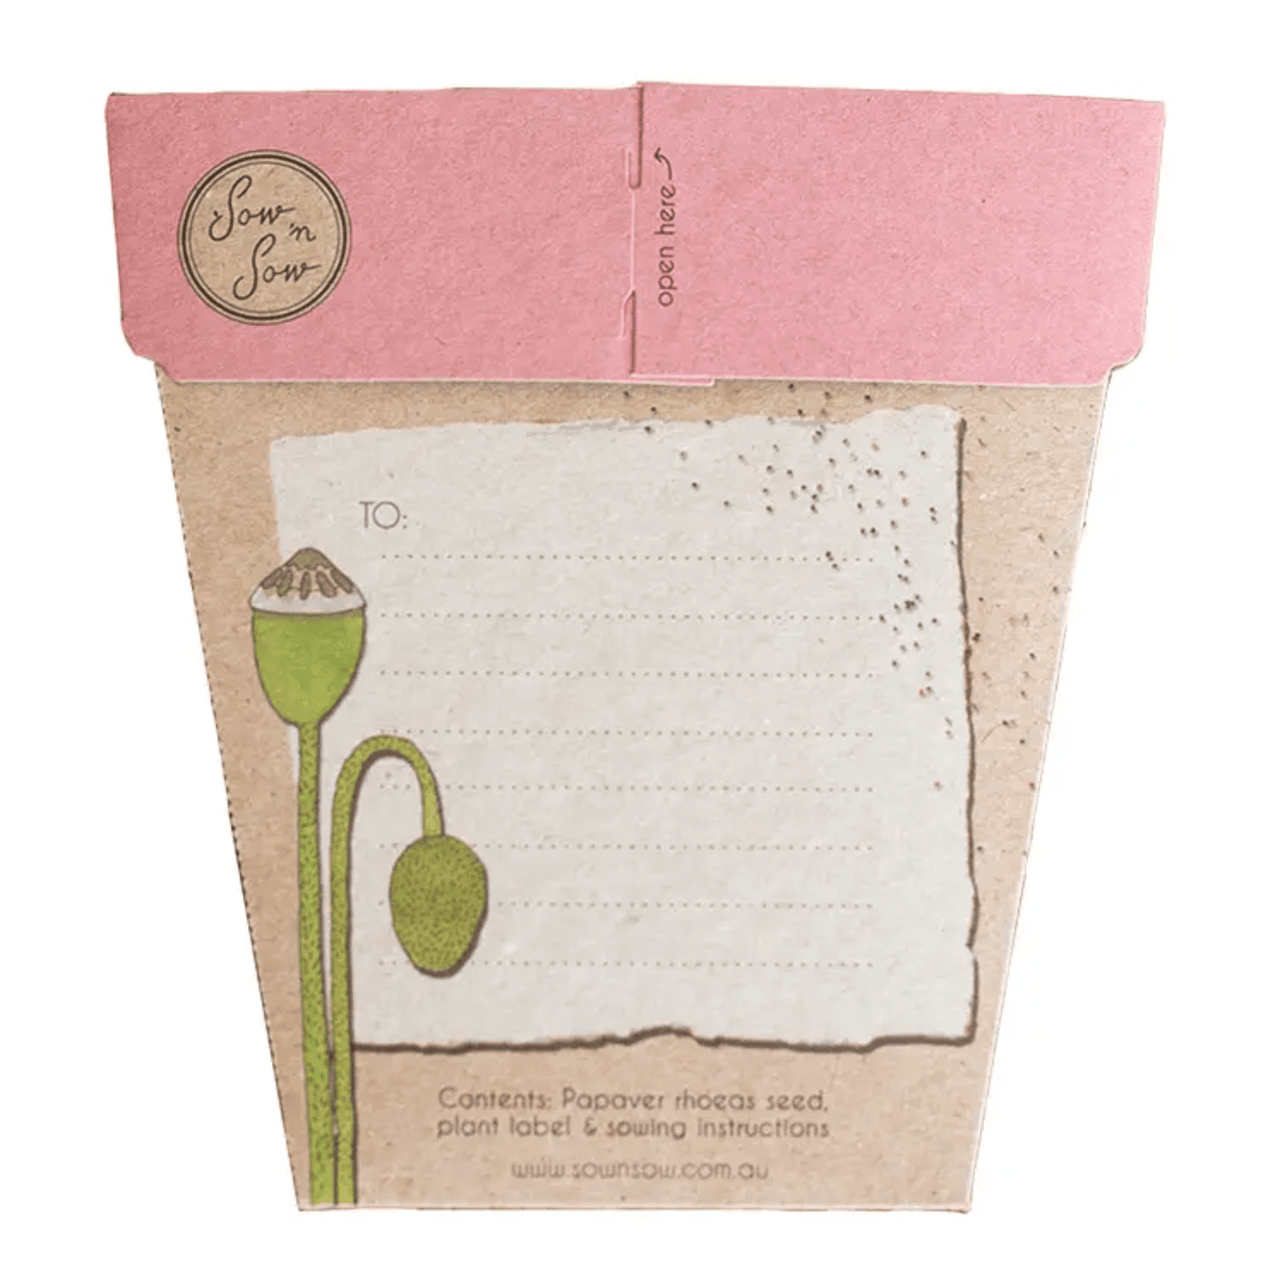 A pink flower pot with a note inside, containing Sow n Sow Poppy seeds.